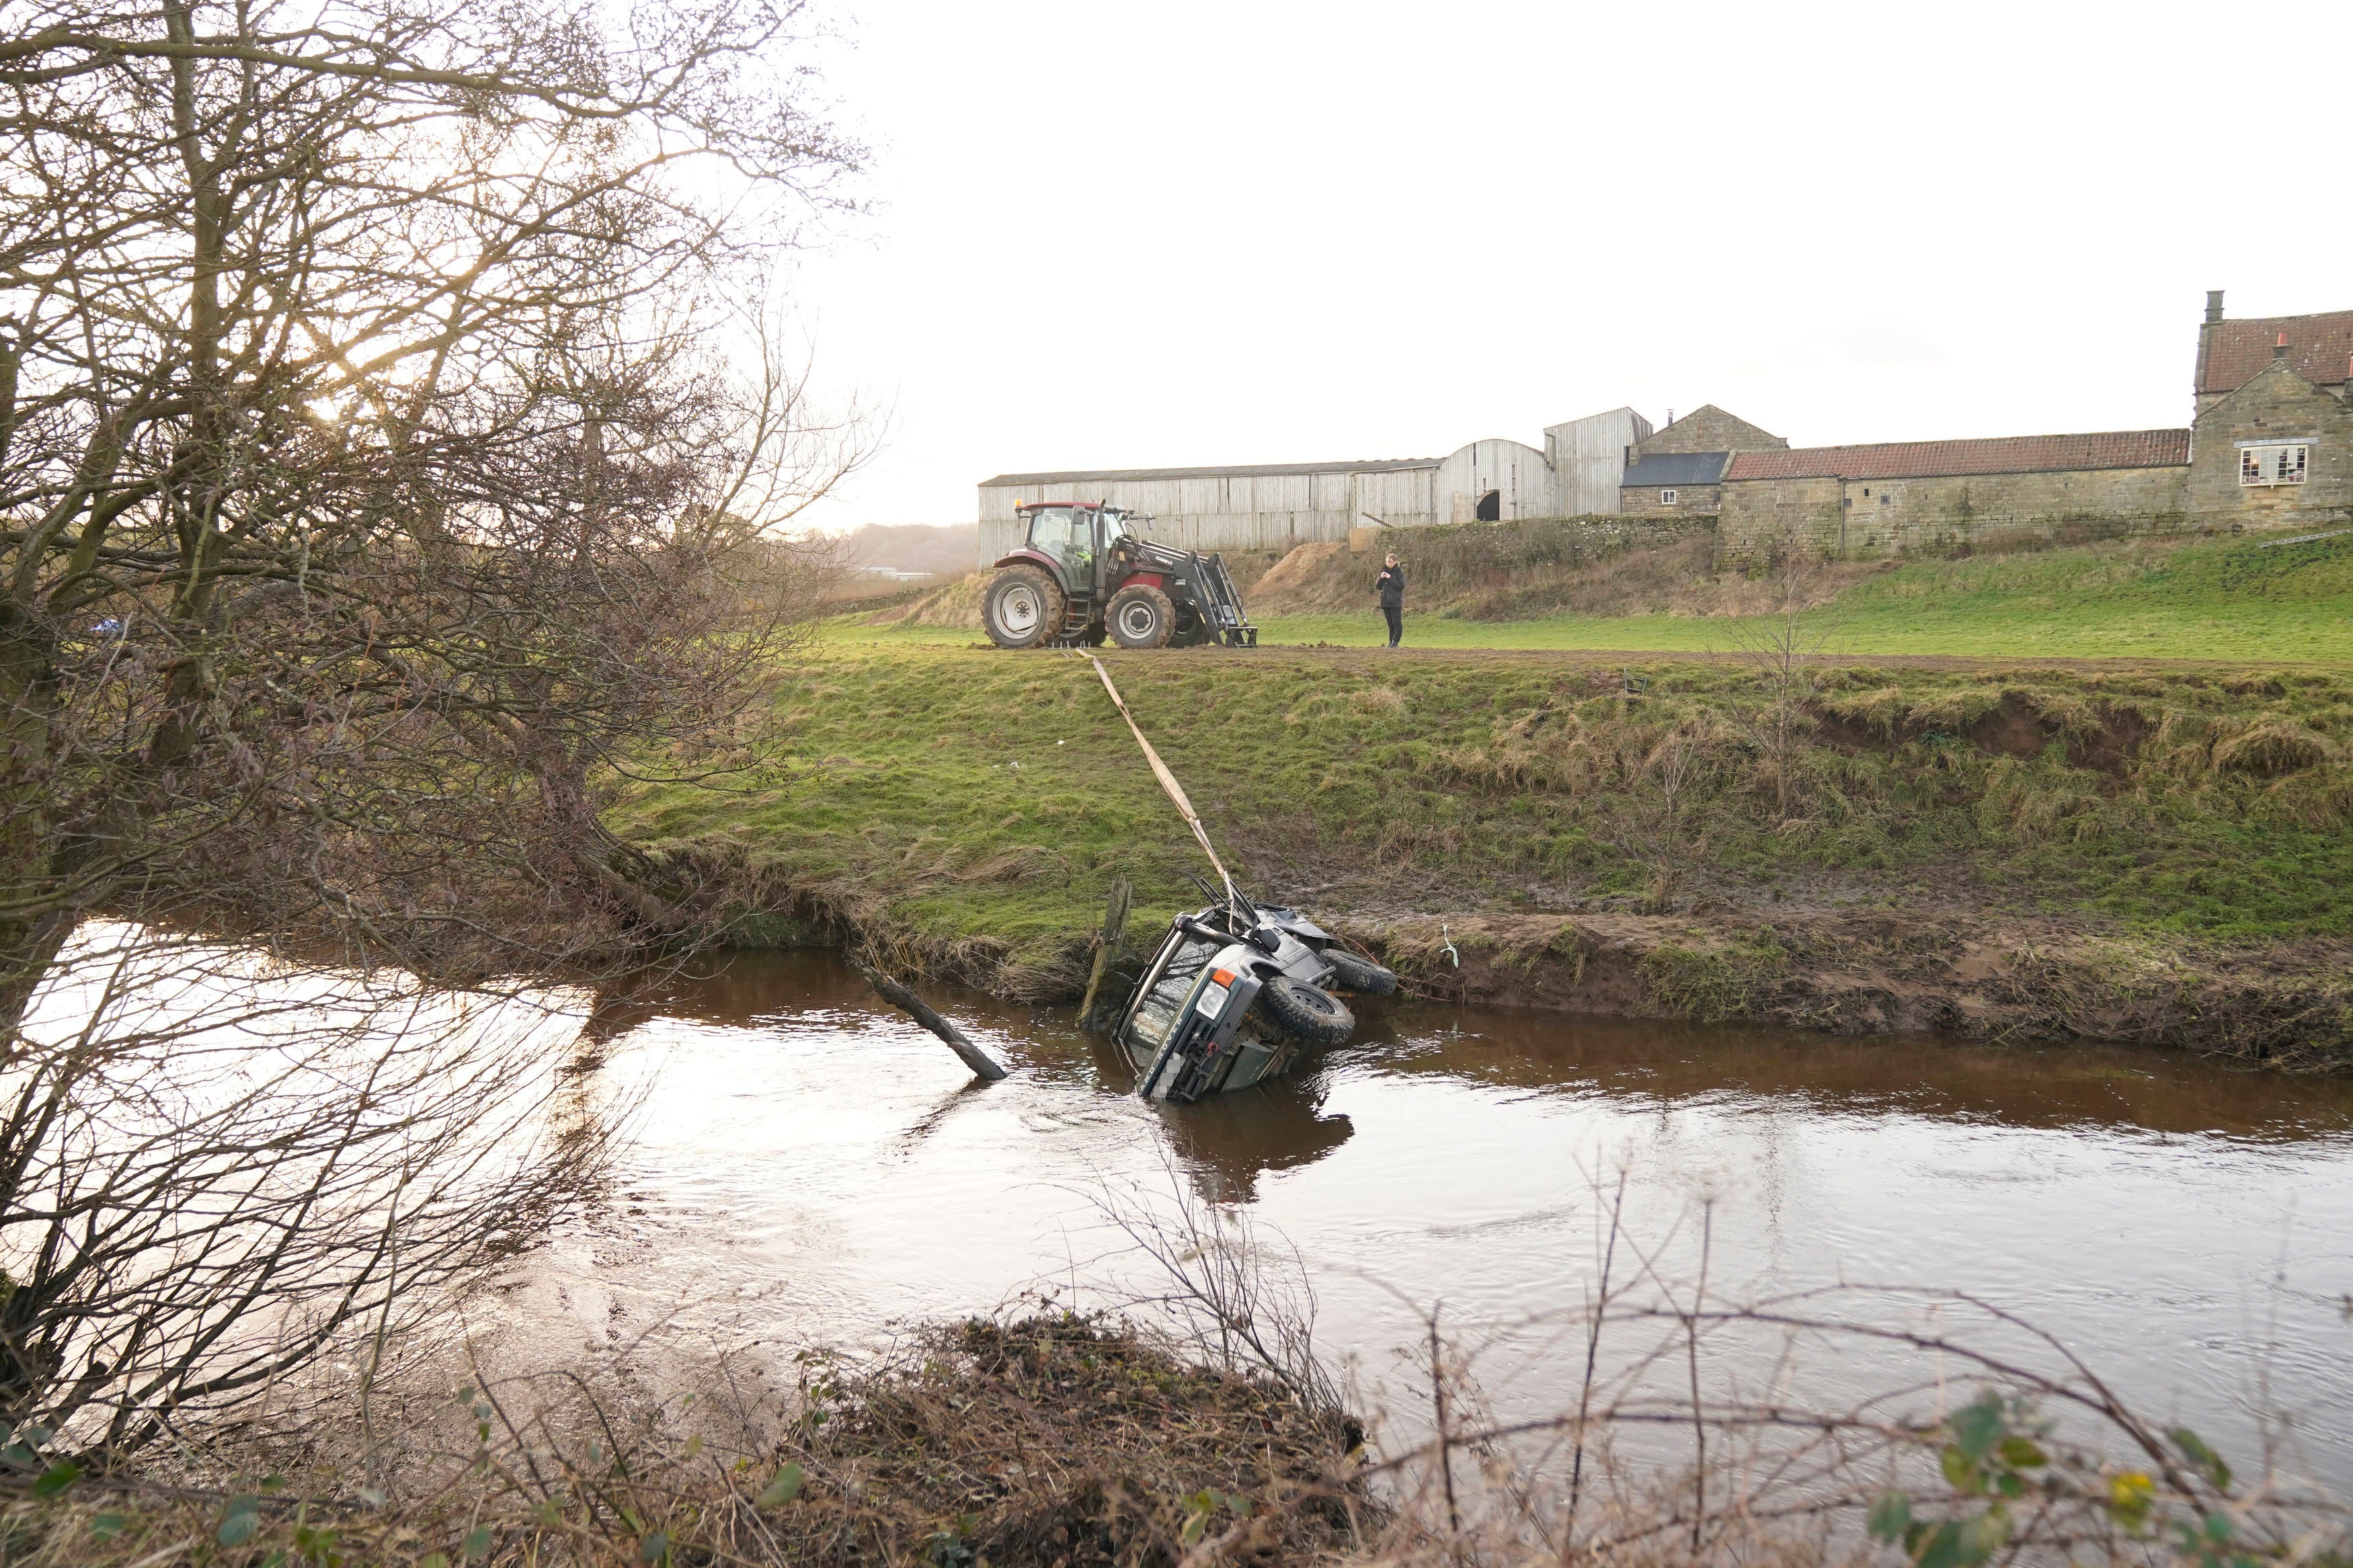 The 4x4 was found 400 yards further downstream